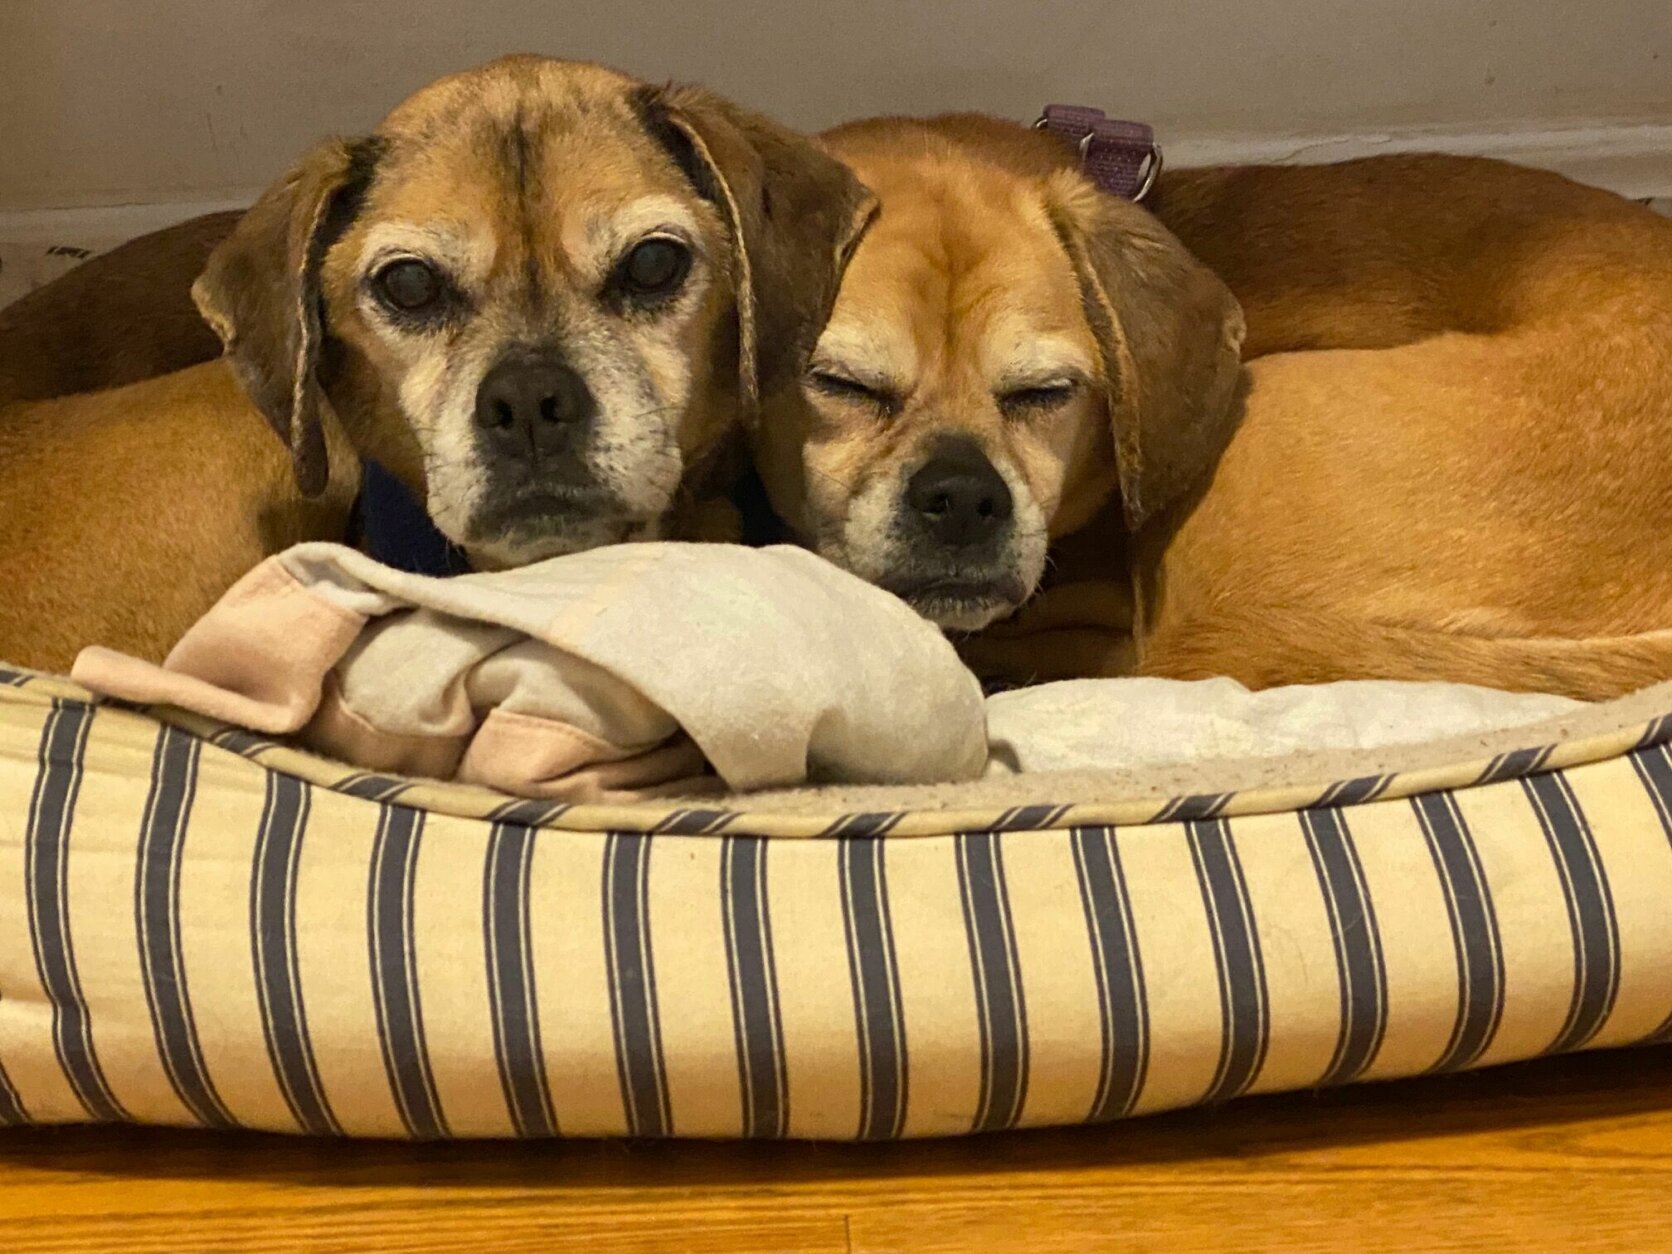 <p>The 15-year-old puggle duo of <strong>Mia</strong> and <strong>Bode</strong> charmed all those who met them during their time at HRA.</p>
<p>They are now happily spending their golden years with a family in D.C.</p>
